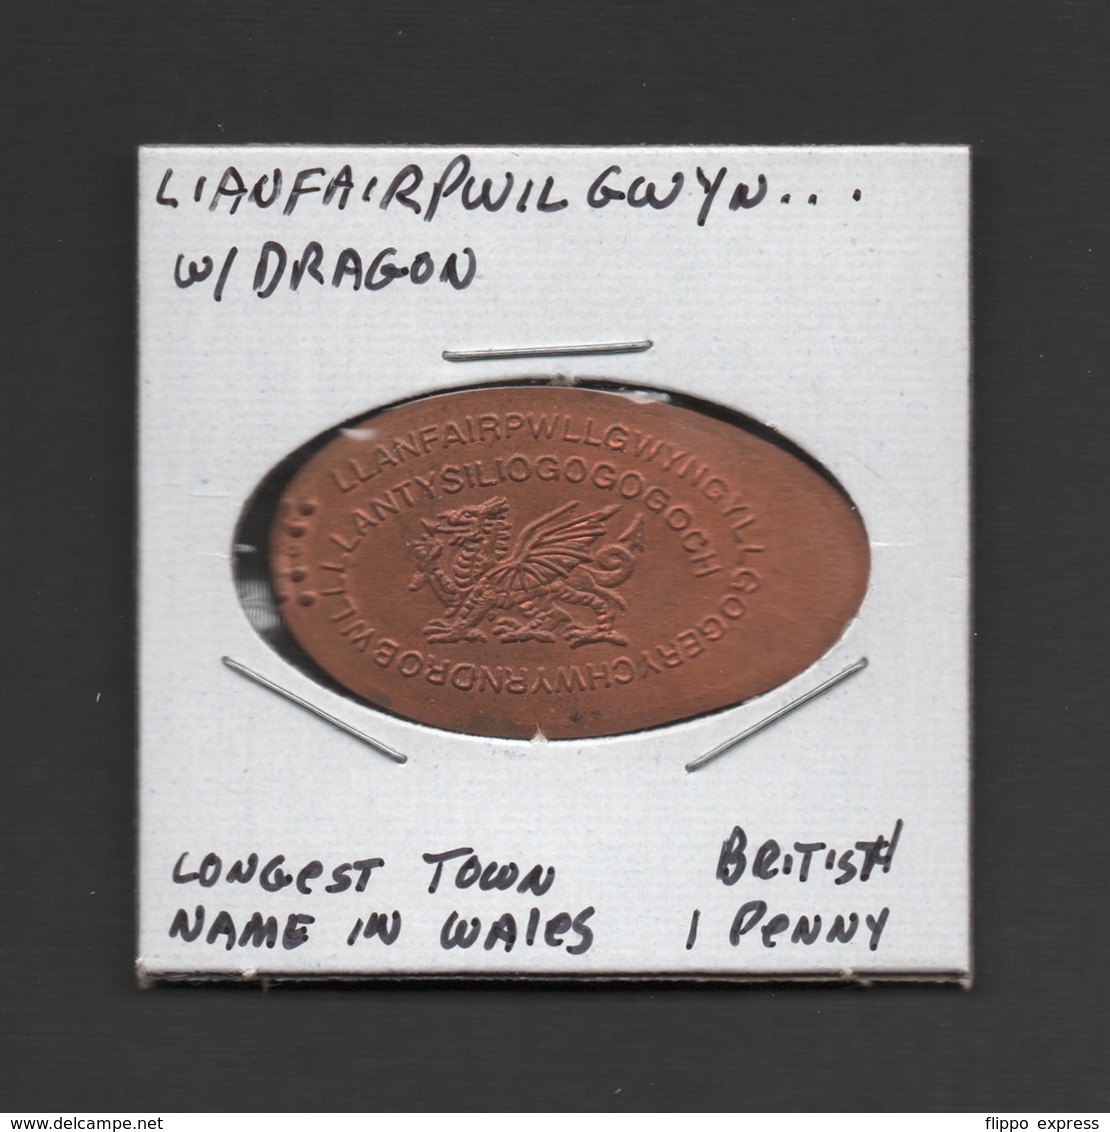 Pressed Penny, Elongated Coin, Lianfairpwilgwyn..., England - Souvenir-Medaille (elongated Coins)